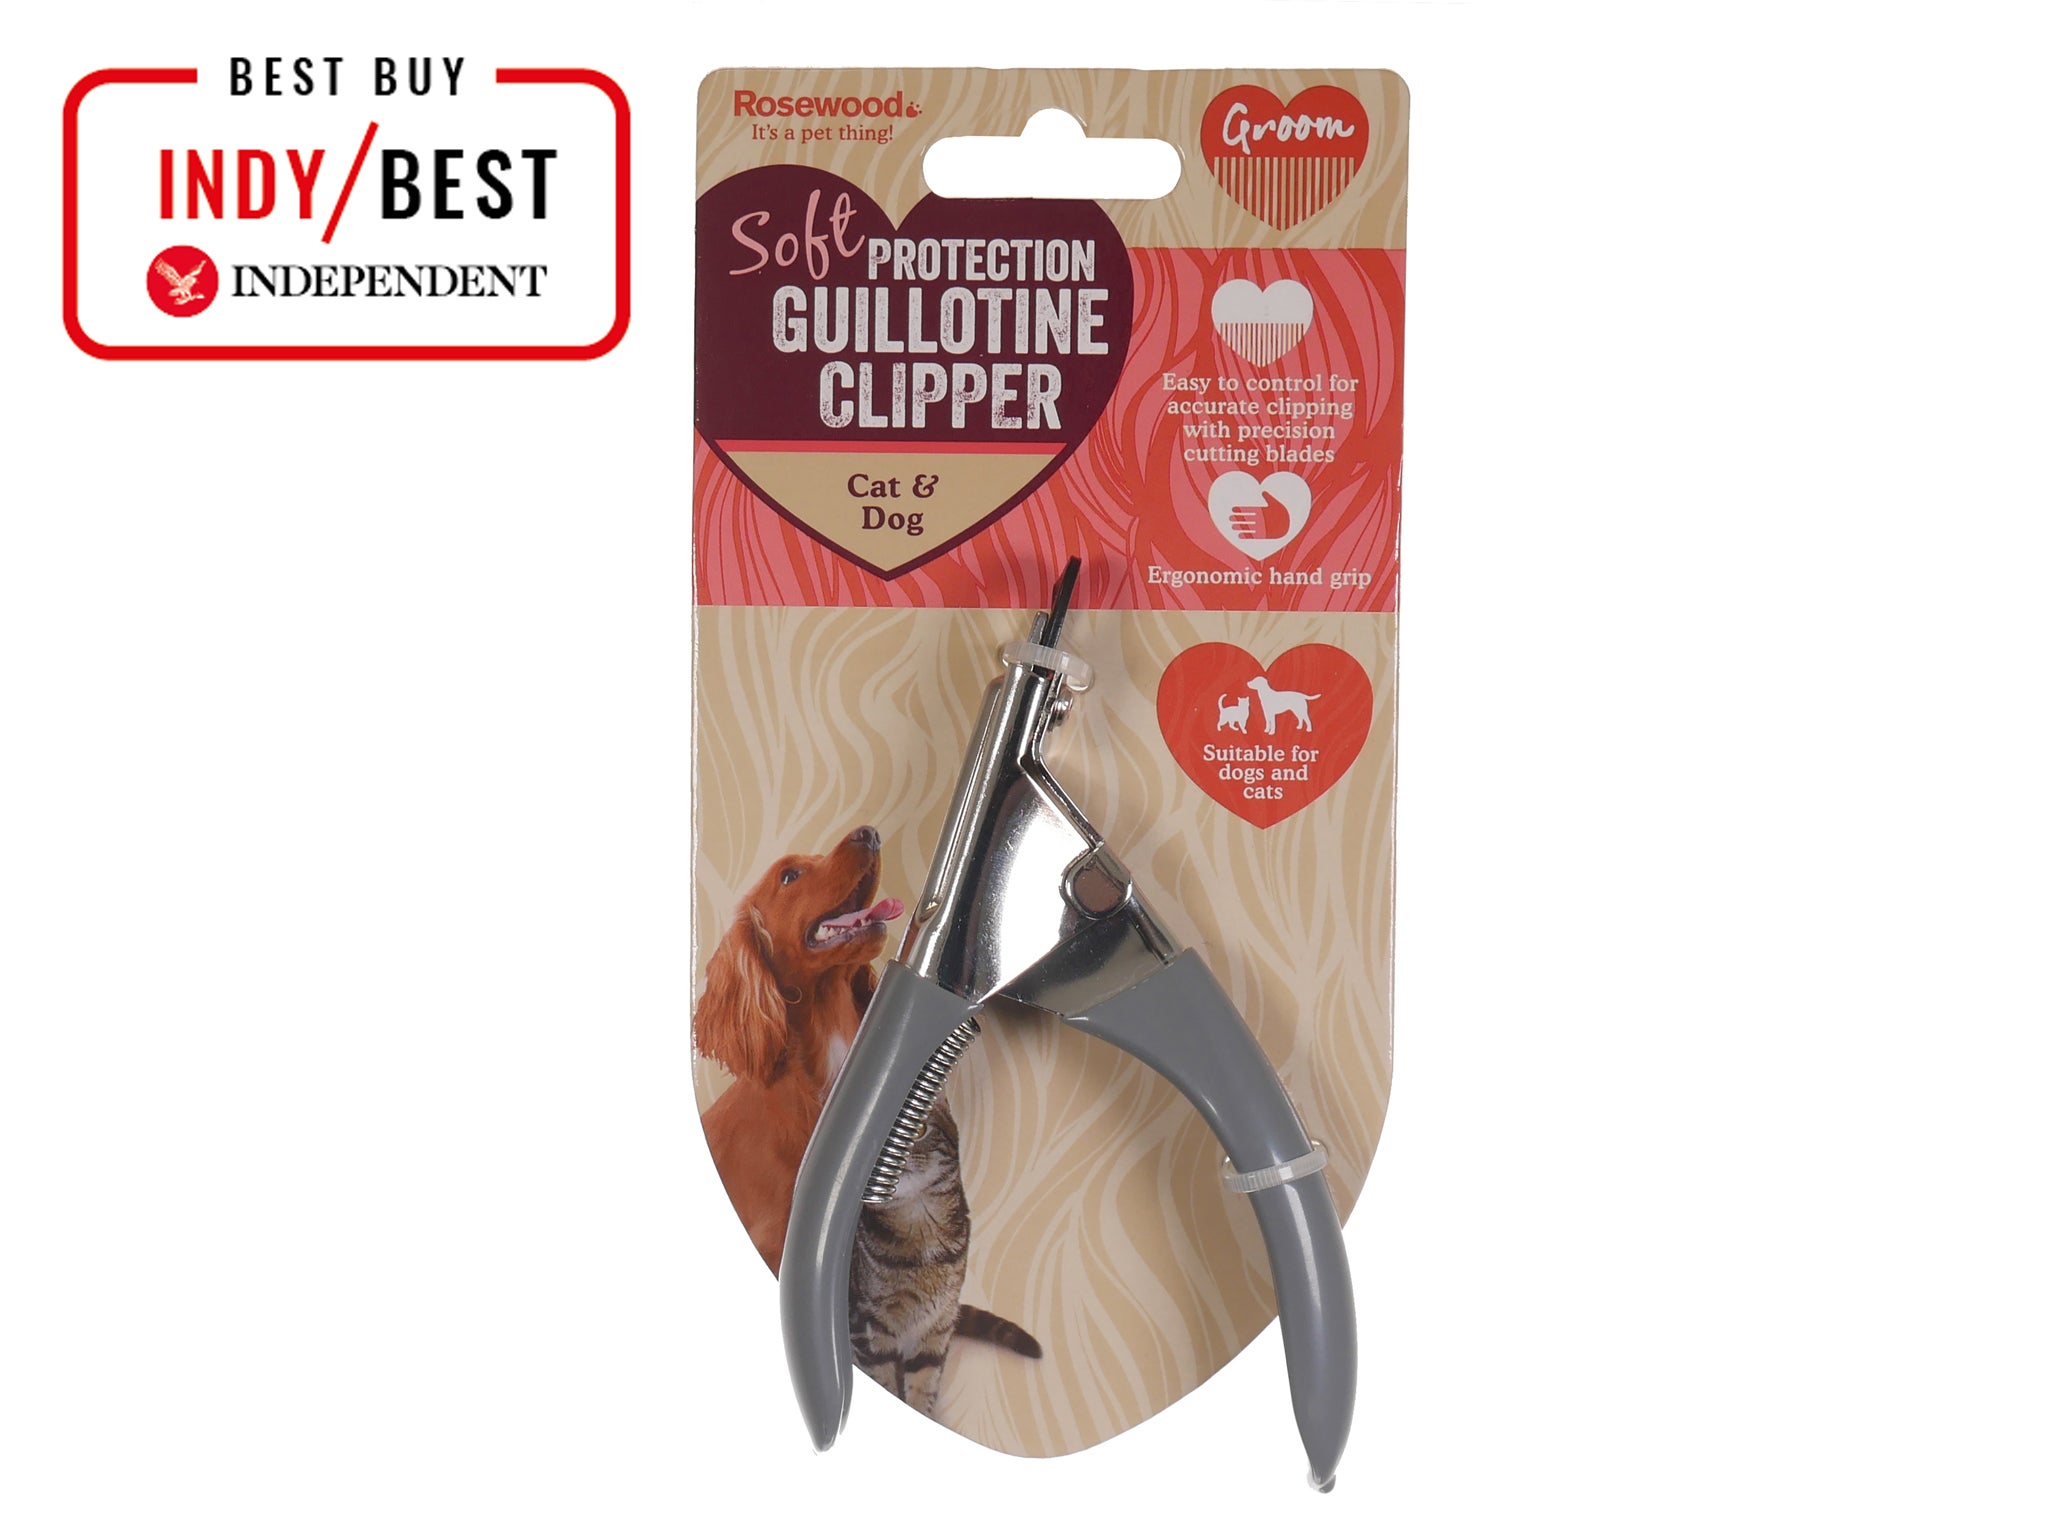 Rosewood%20guillotine%20nail%20clipper